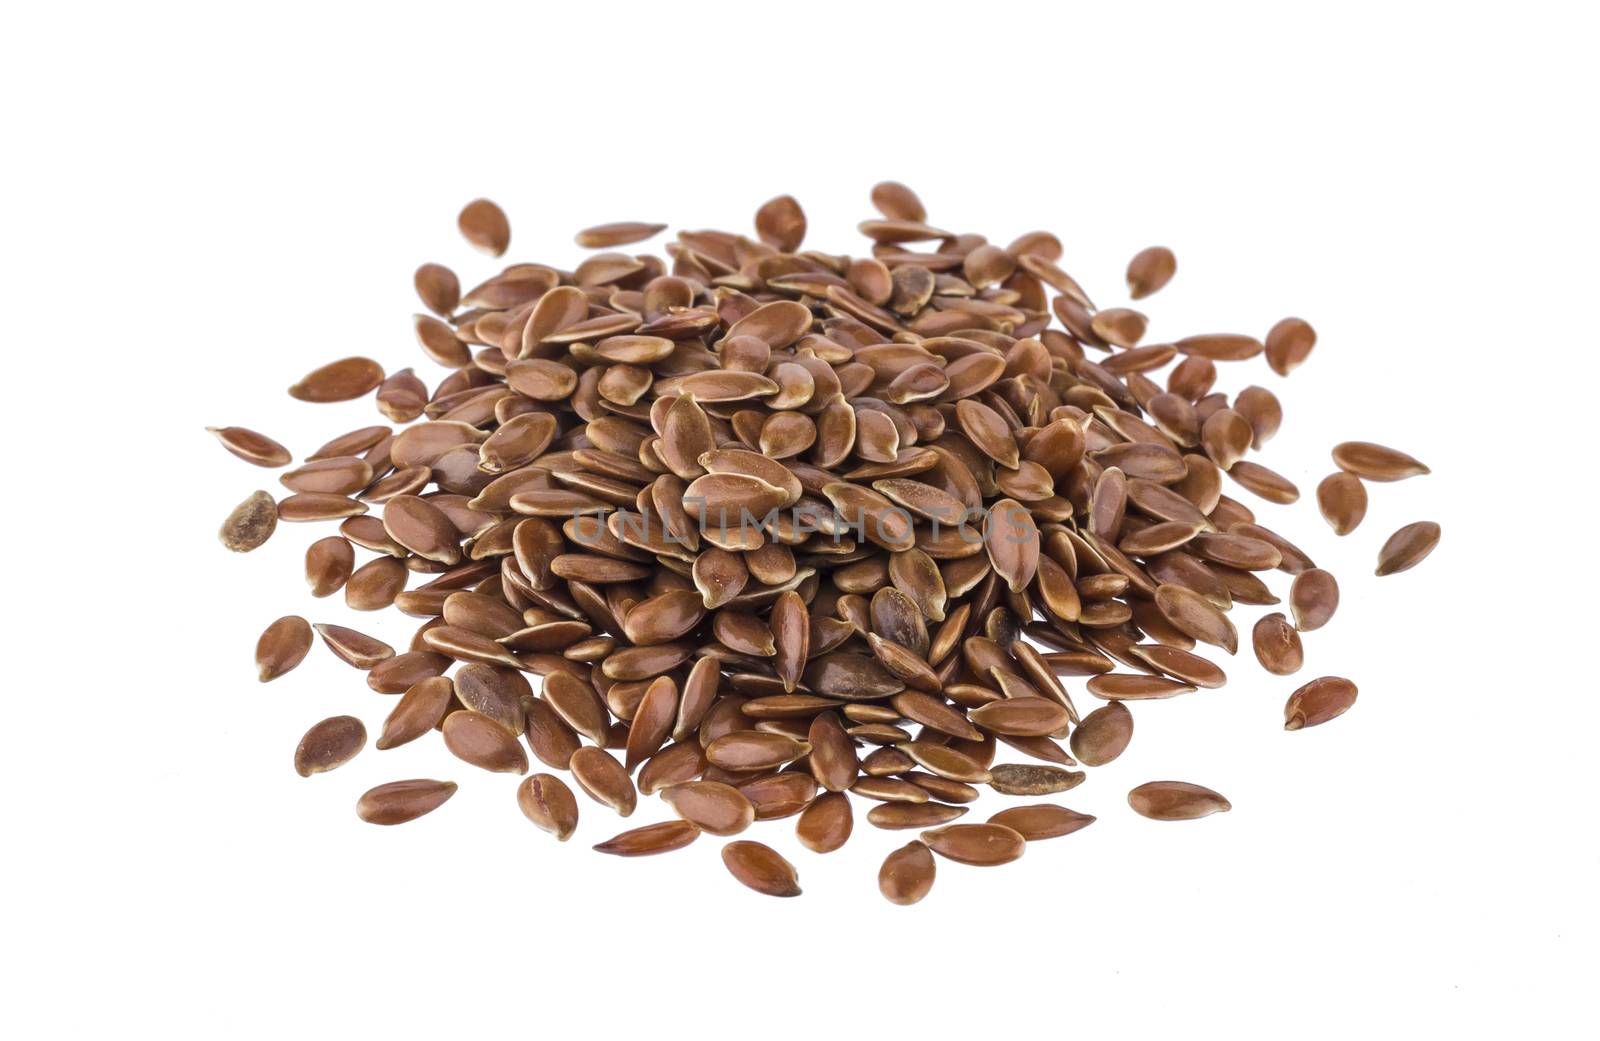 Pile of flax seeds isolated on white background by xamtiw